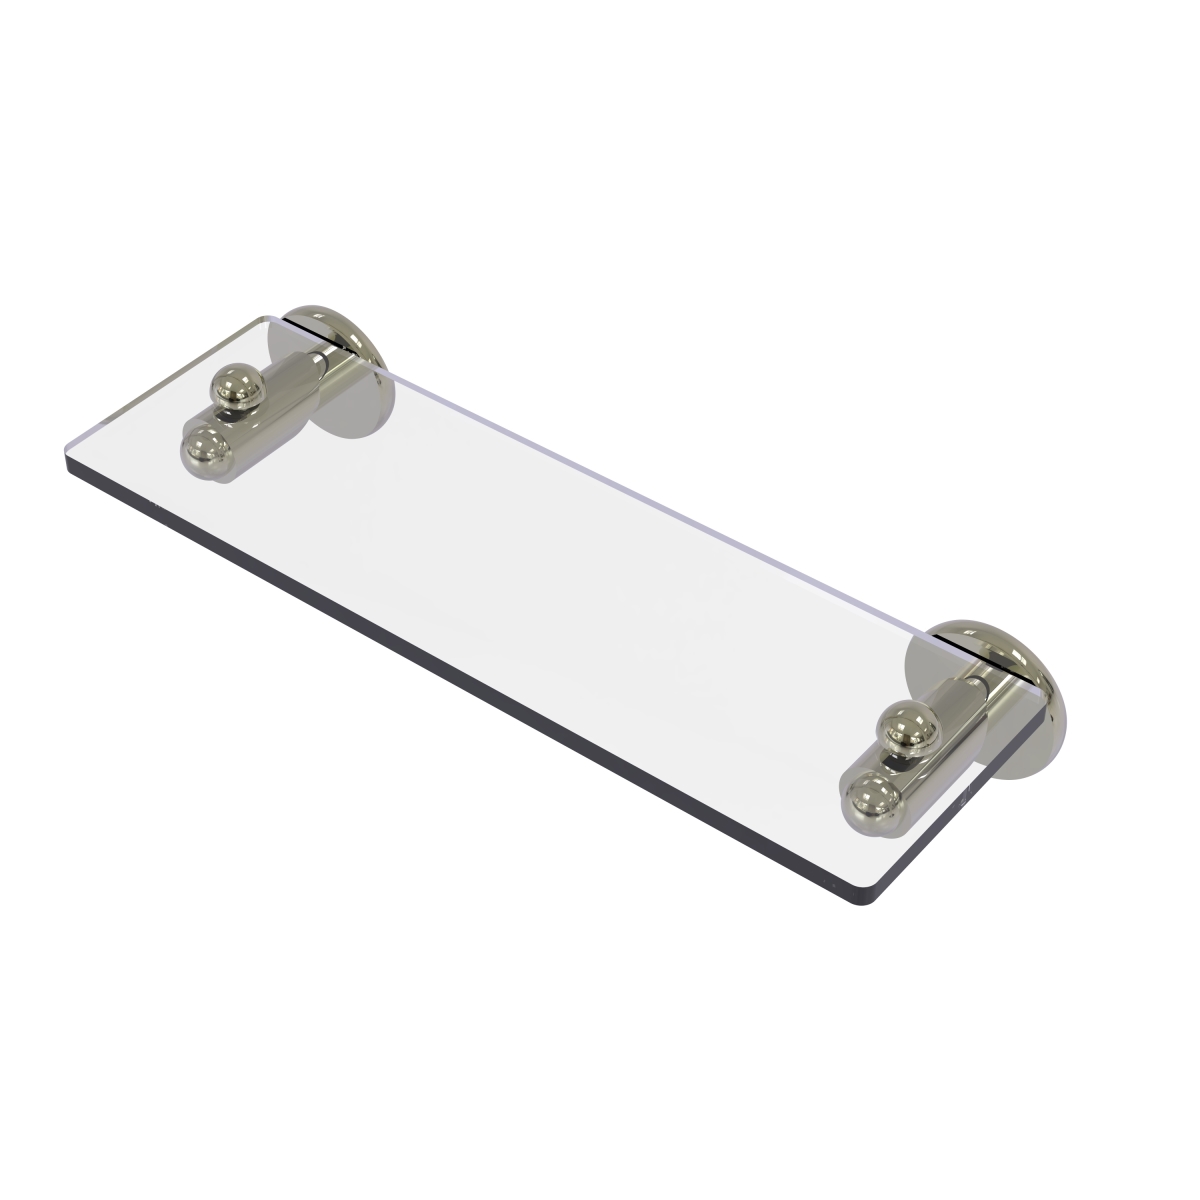 Allied Brass SH-1-16-PNI 16 in. Soho Collection Glass Vanity Shelf with Beveled Edges, Polished Nickel